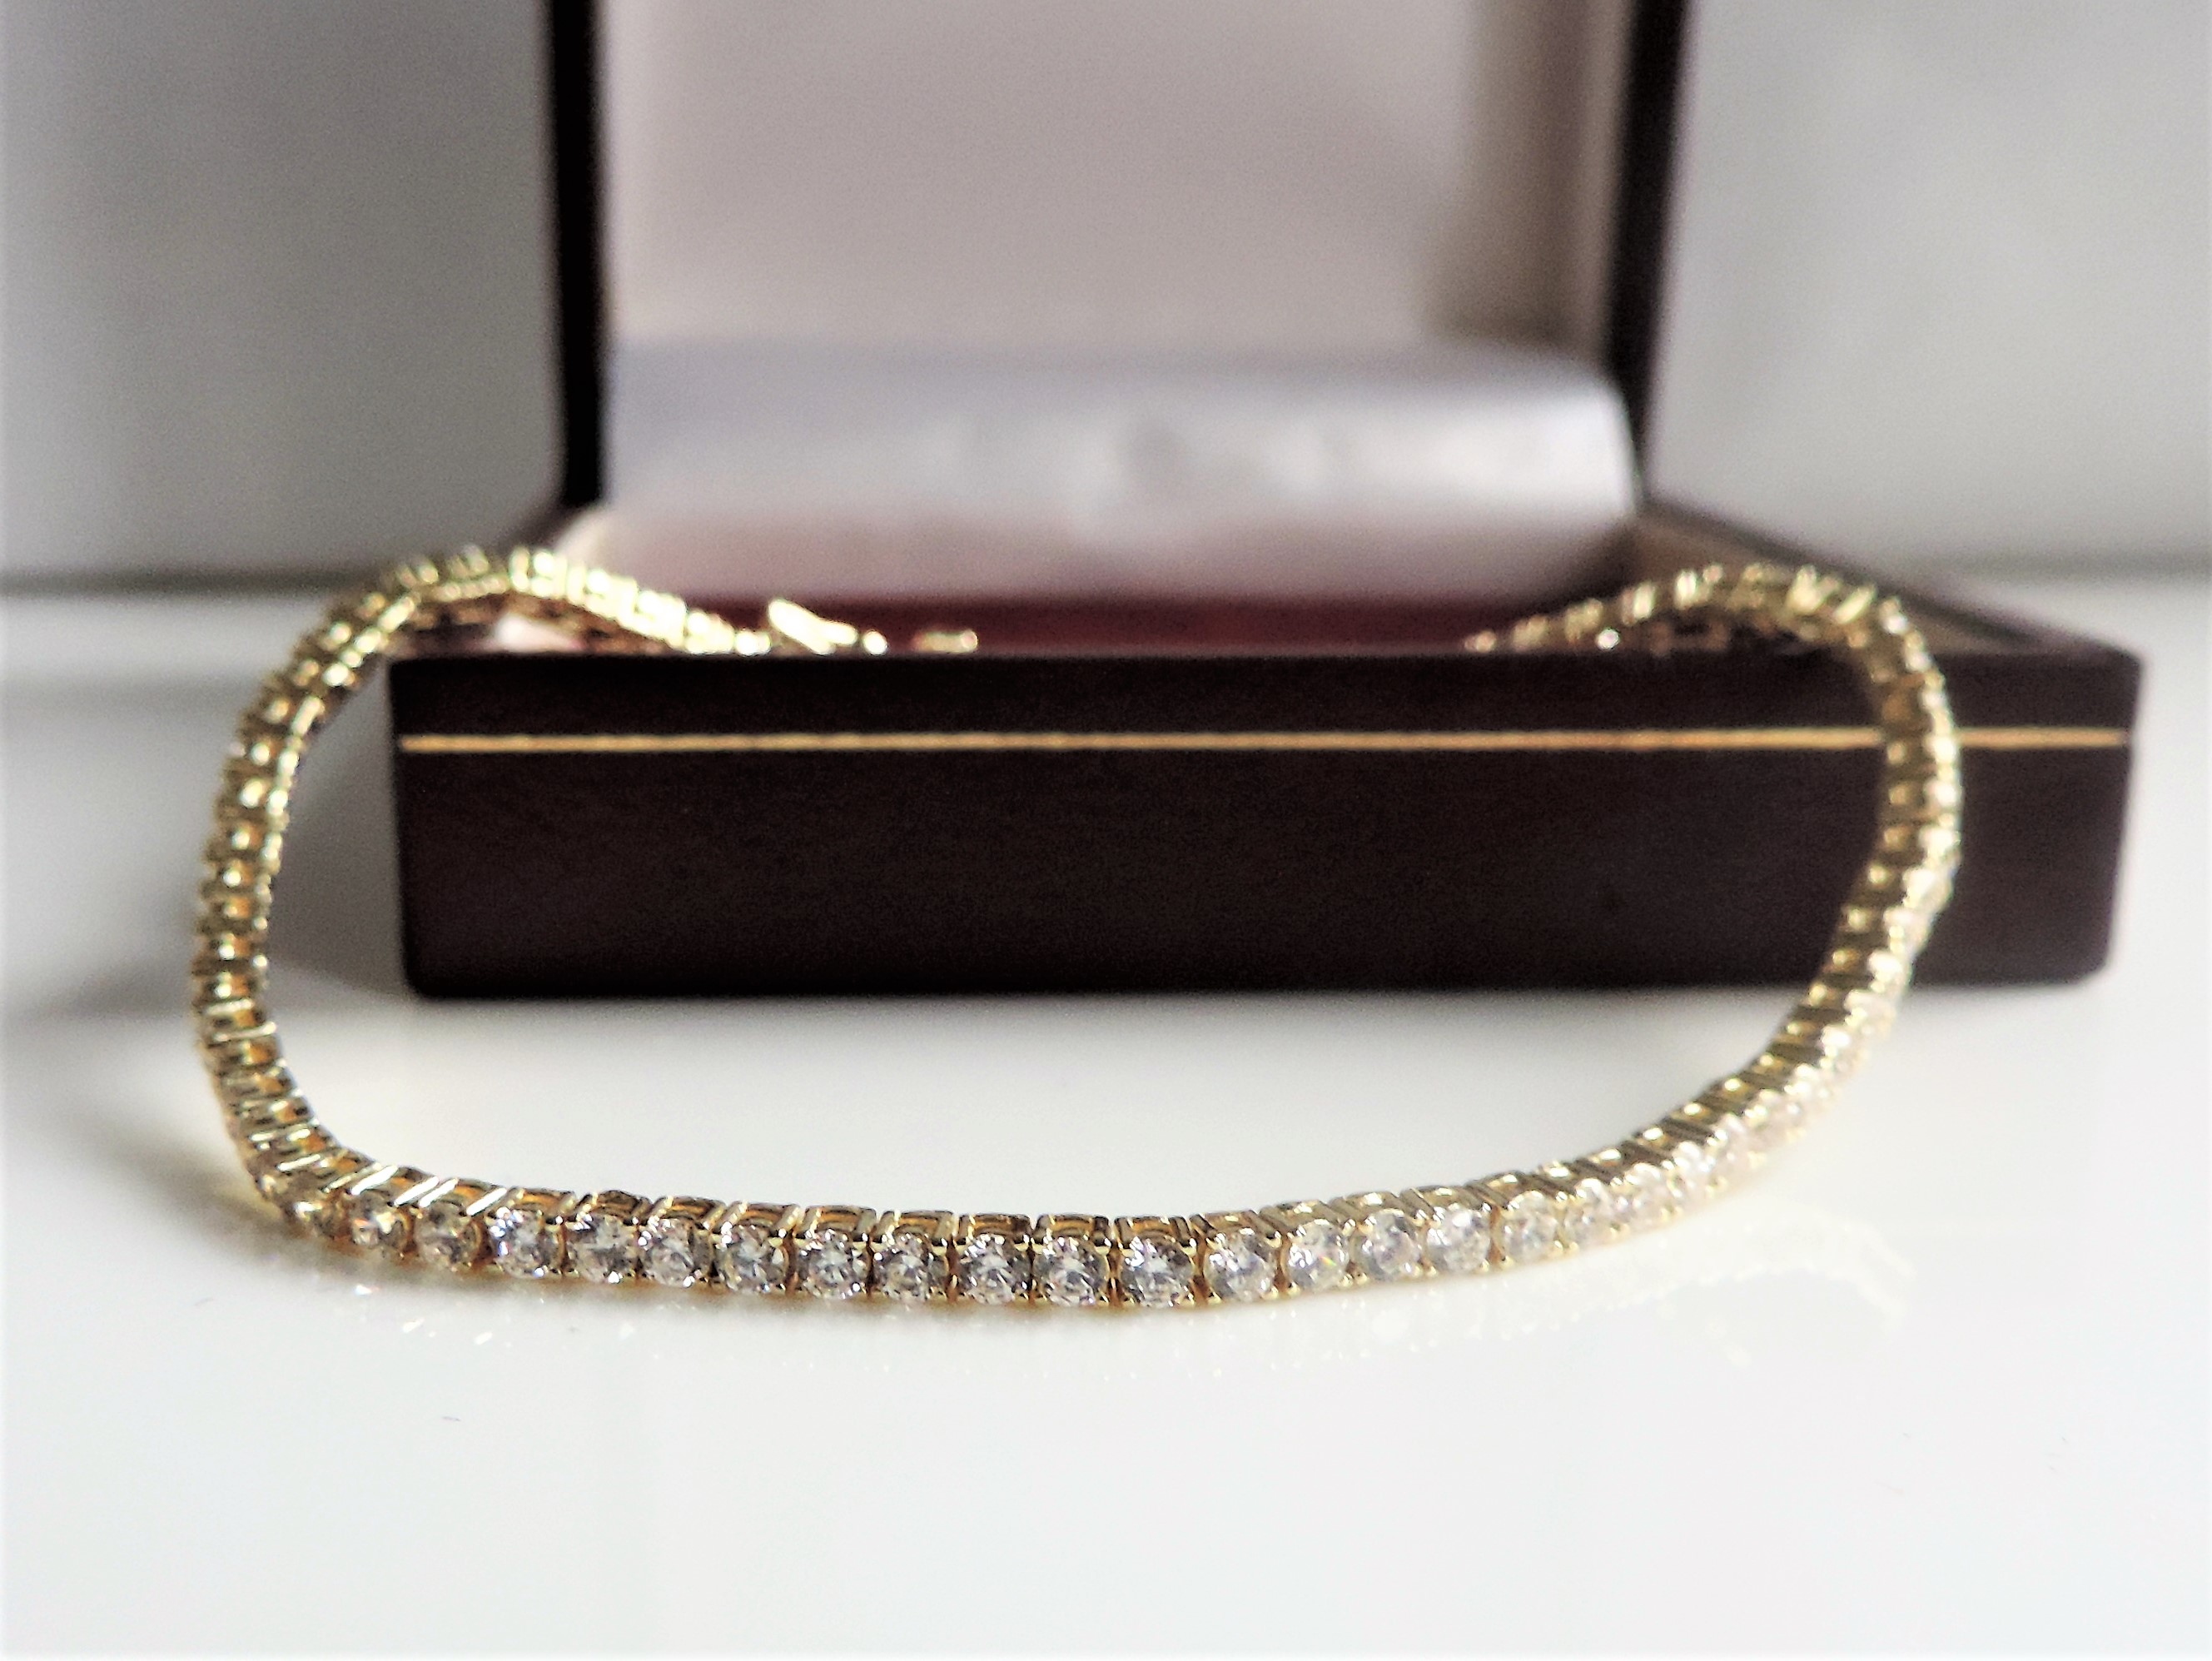 Gold on Sterling Silver Tennis Bracelet 'New' with Gift Pouch - Image 2 of 4